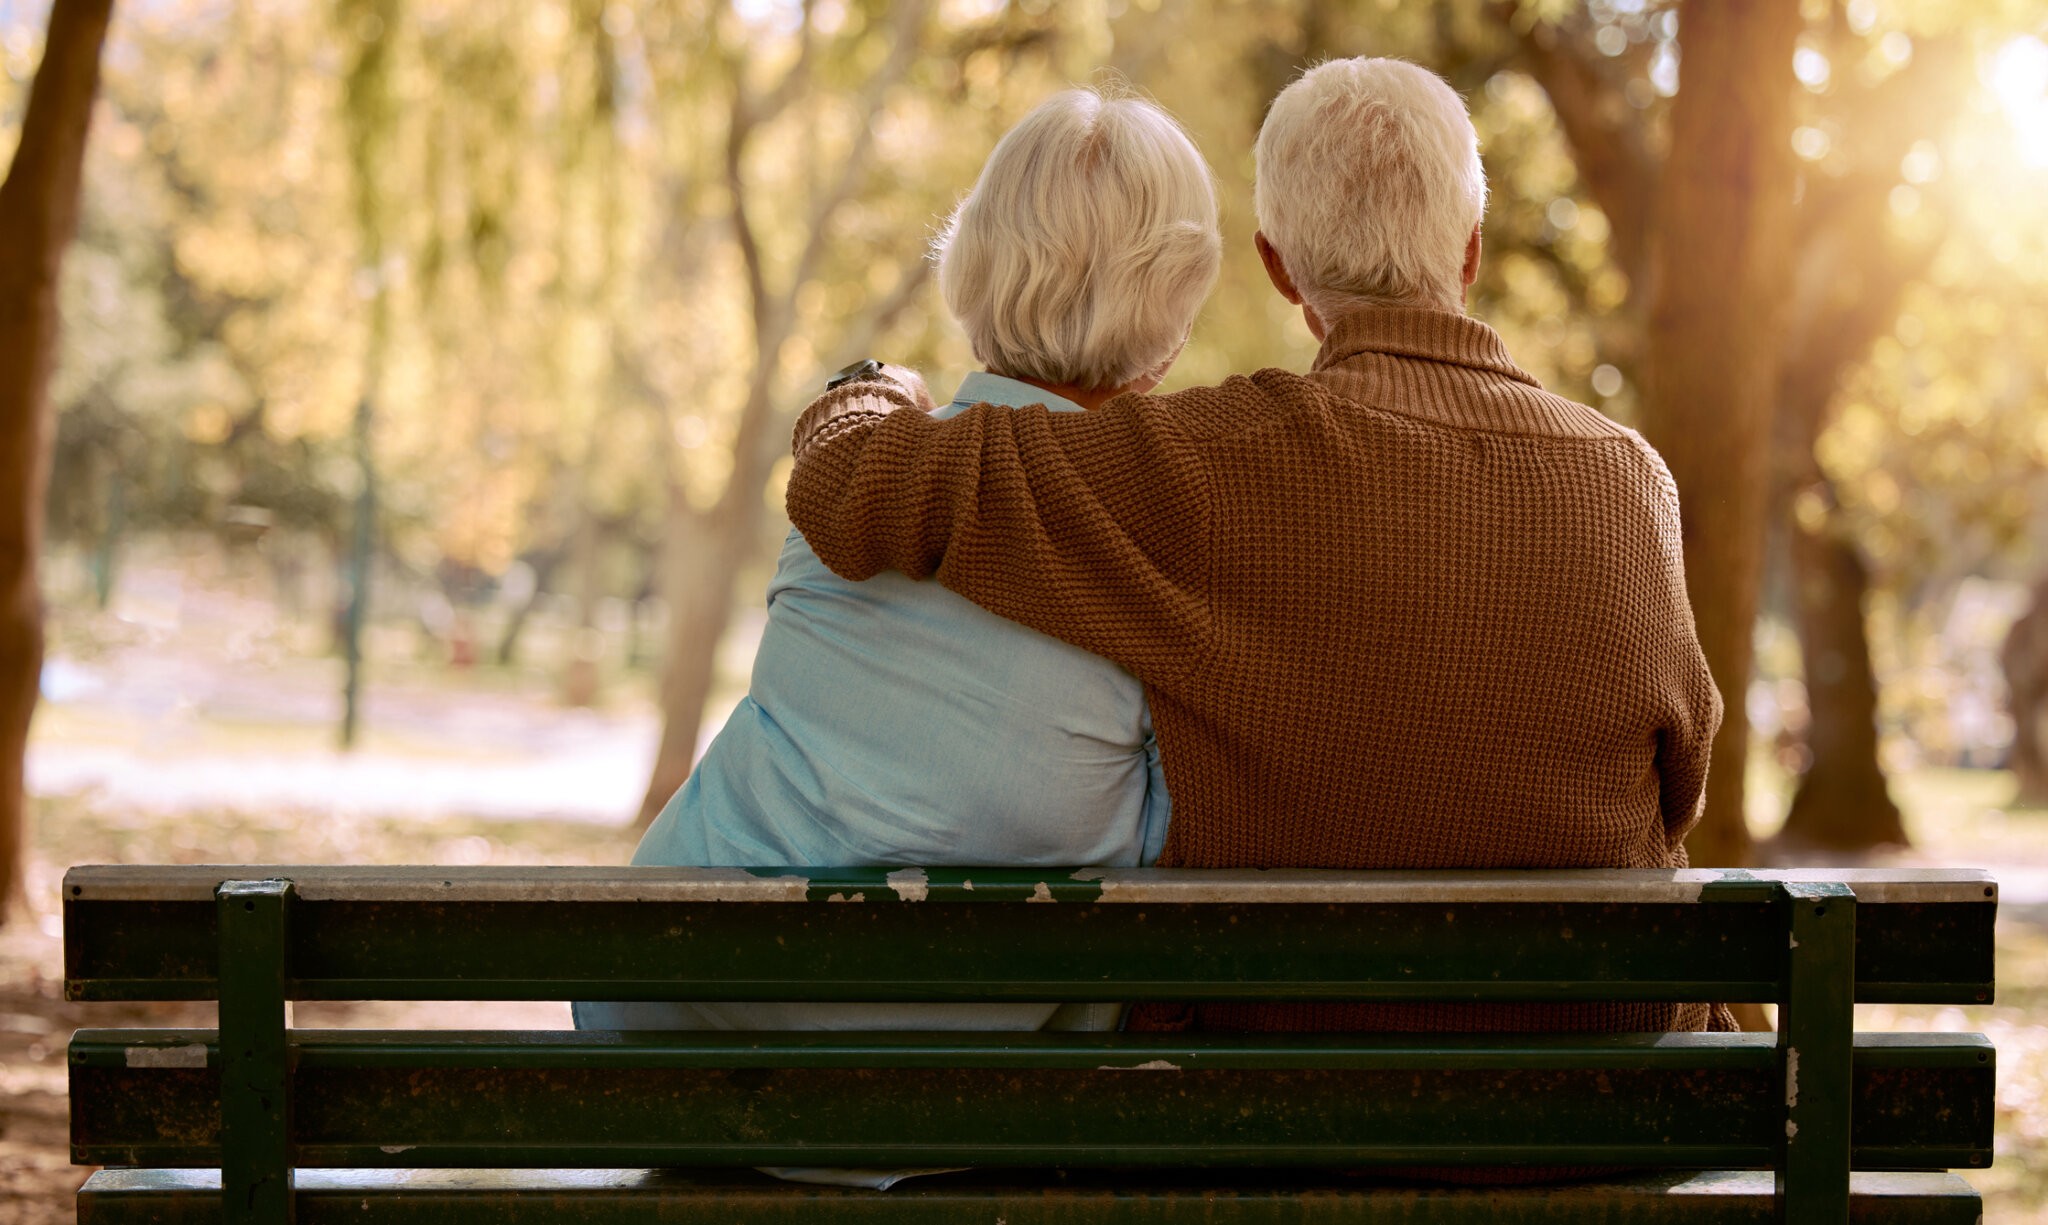 Love, hug and old couple in a park on a bench for a calm, peaceful or romantic summer marriage anniversary date. Nature, romance or back view of old woman and elderly partner in a relaxing embrace Golden Bachelor